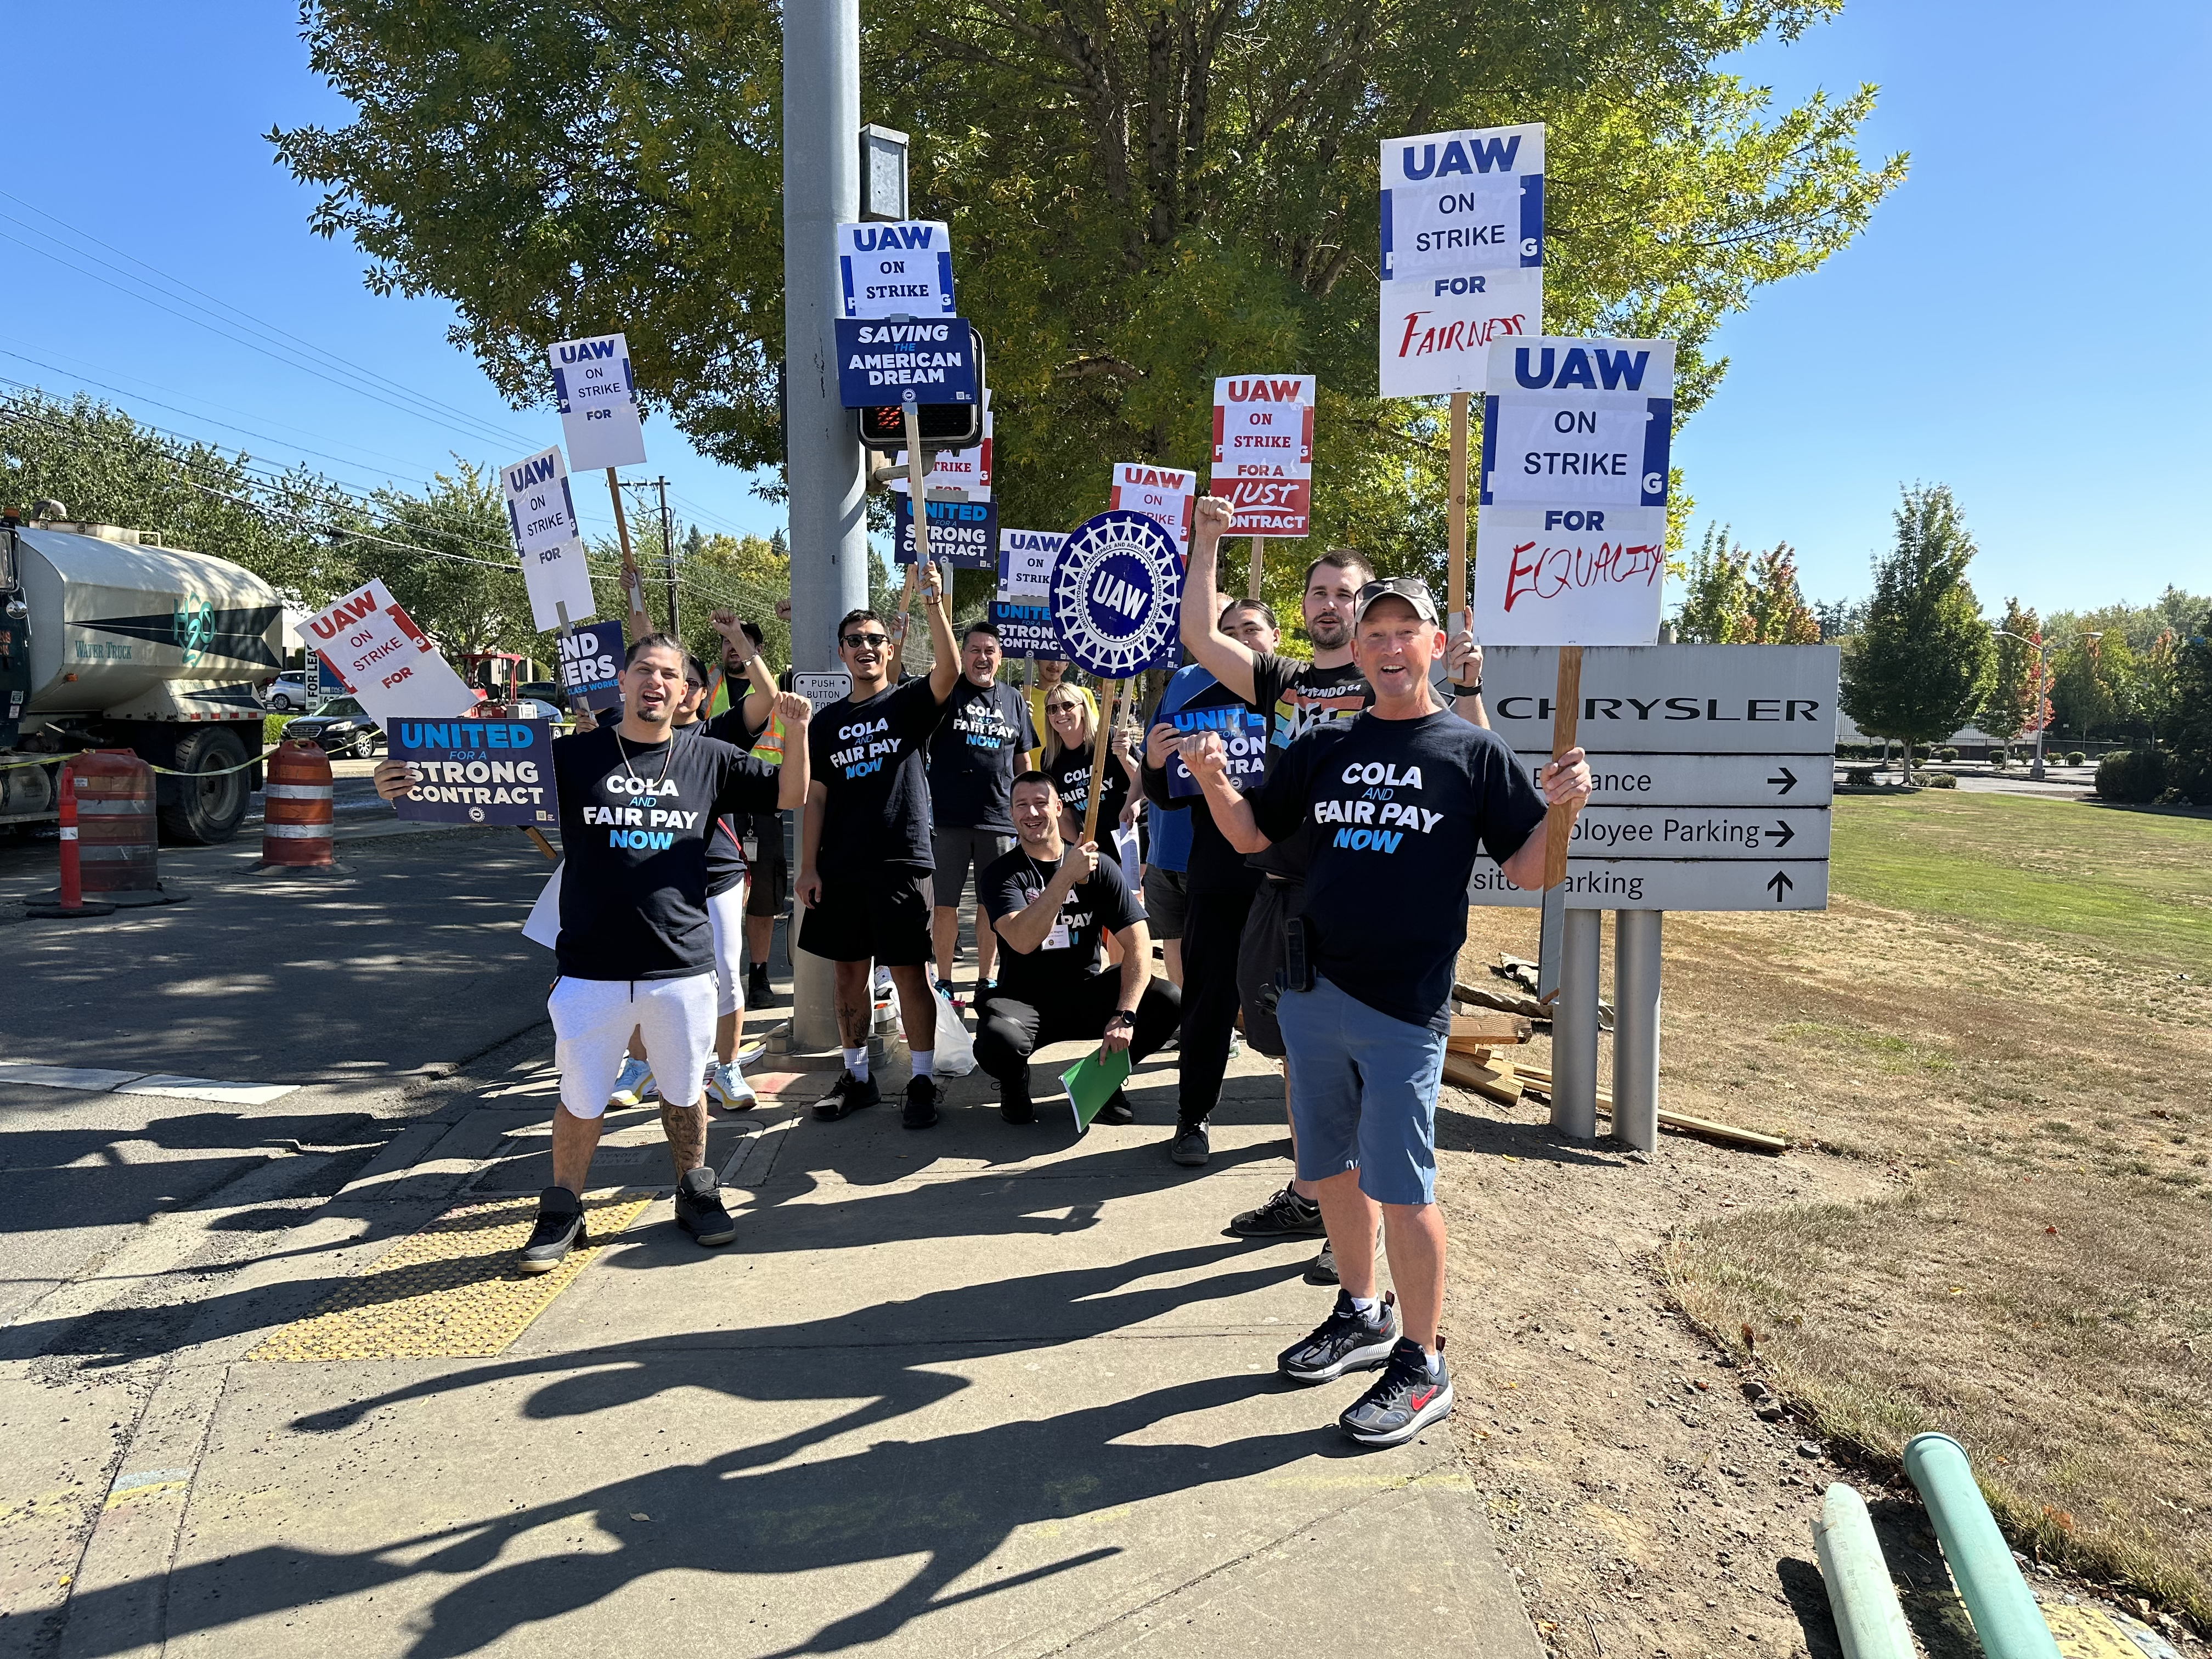 UAW 492 members holding picket signs